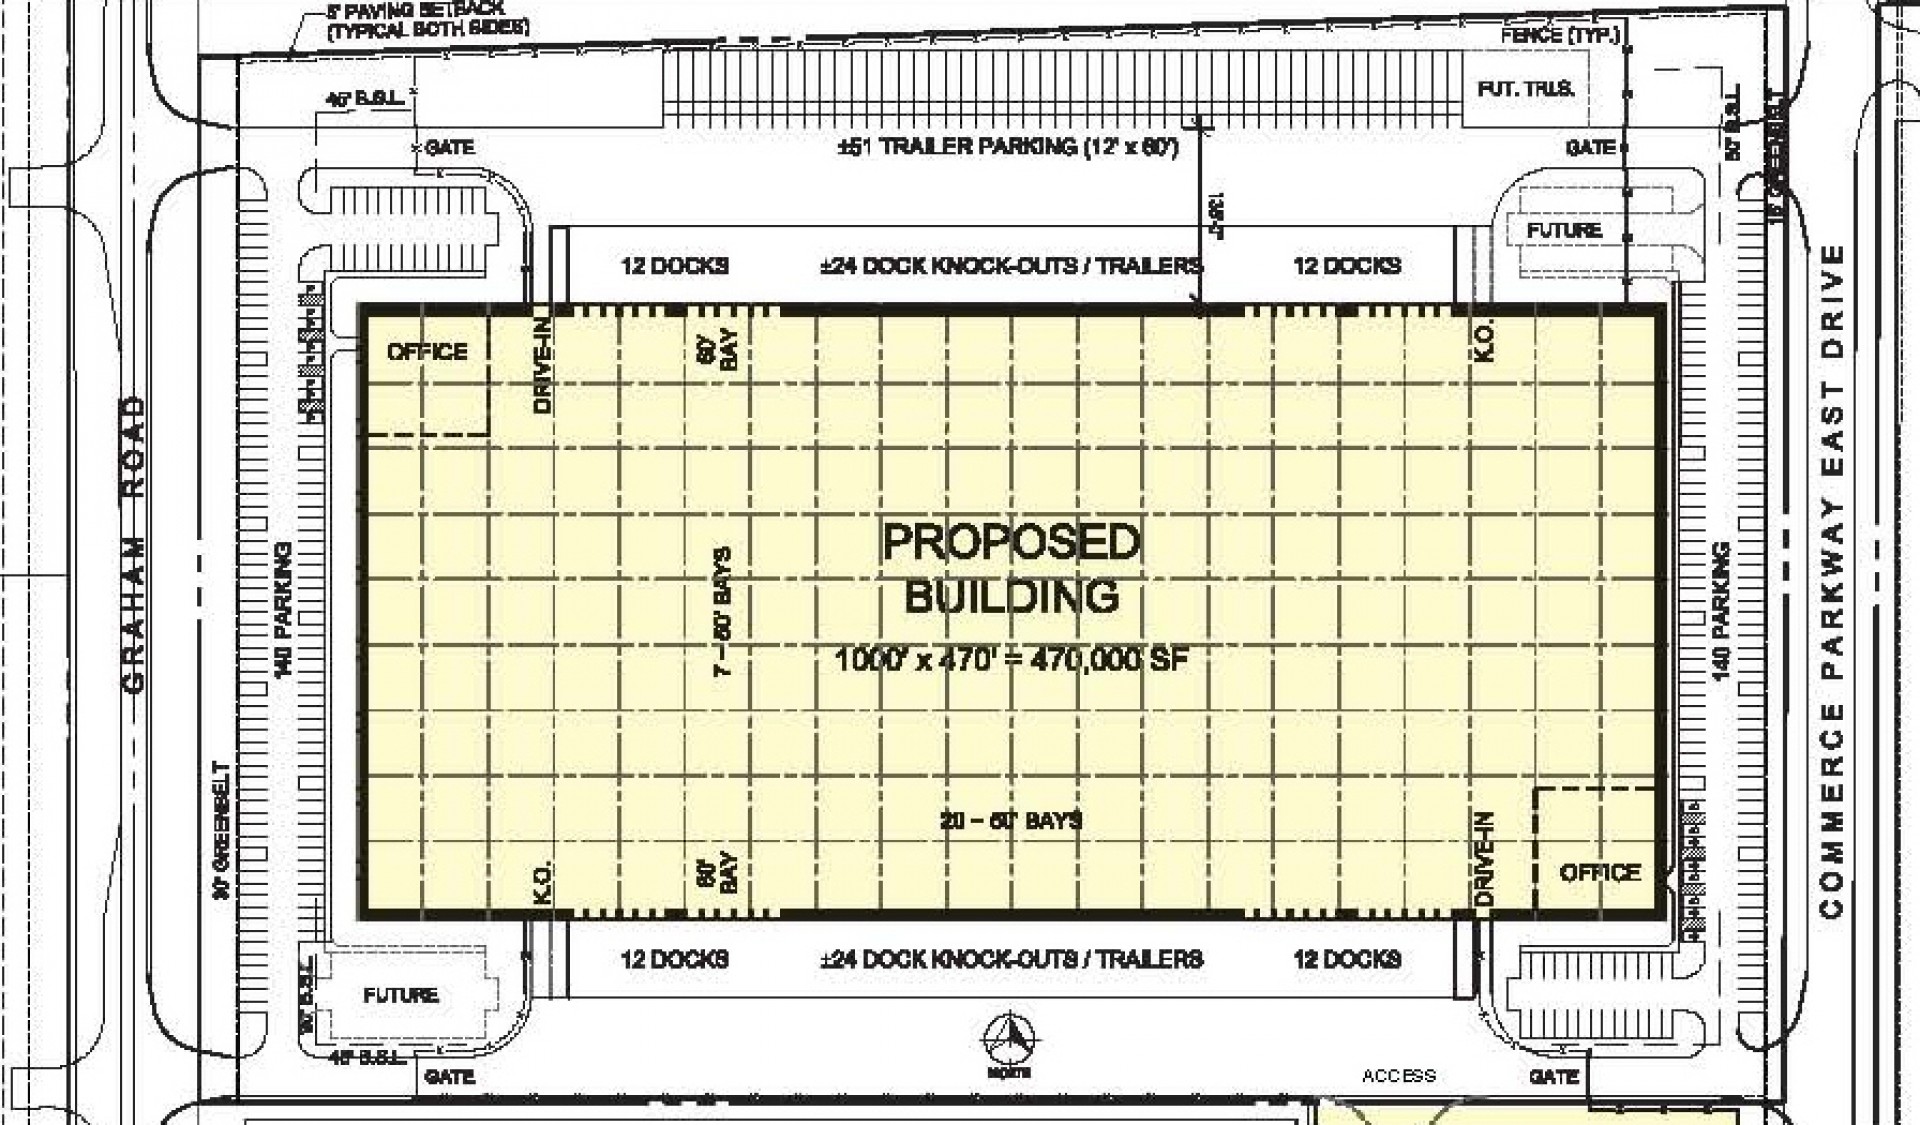 Building Plan cropped